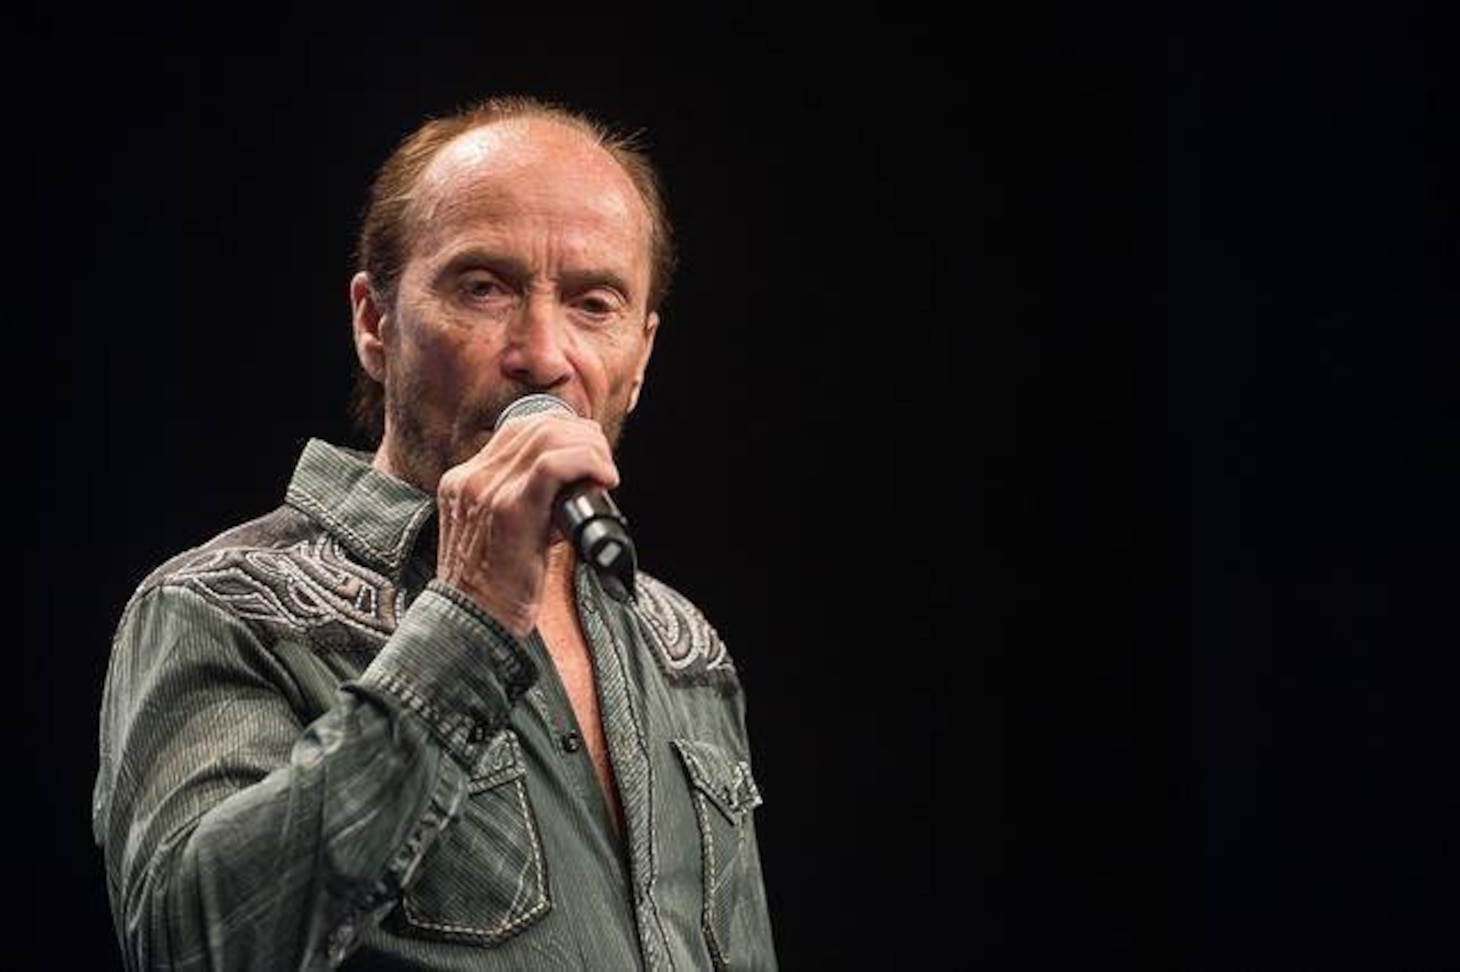 Country music performer Lee Greenwood in 2016.